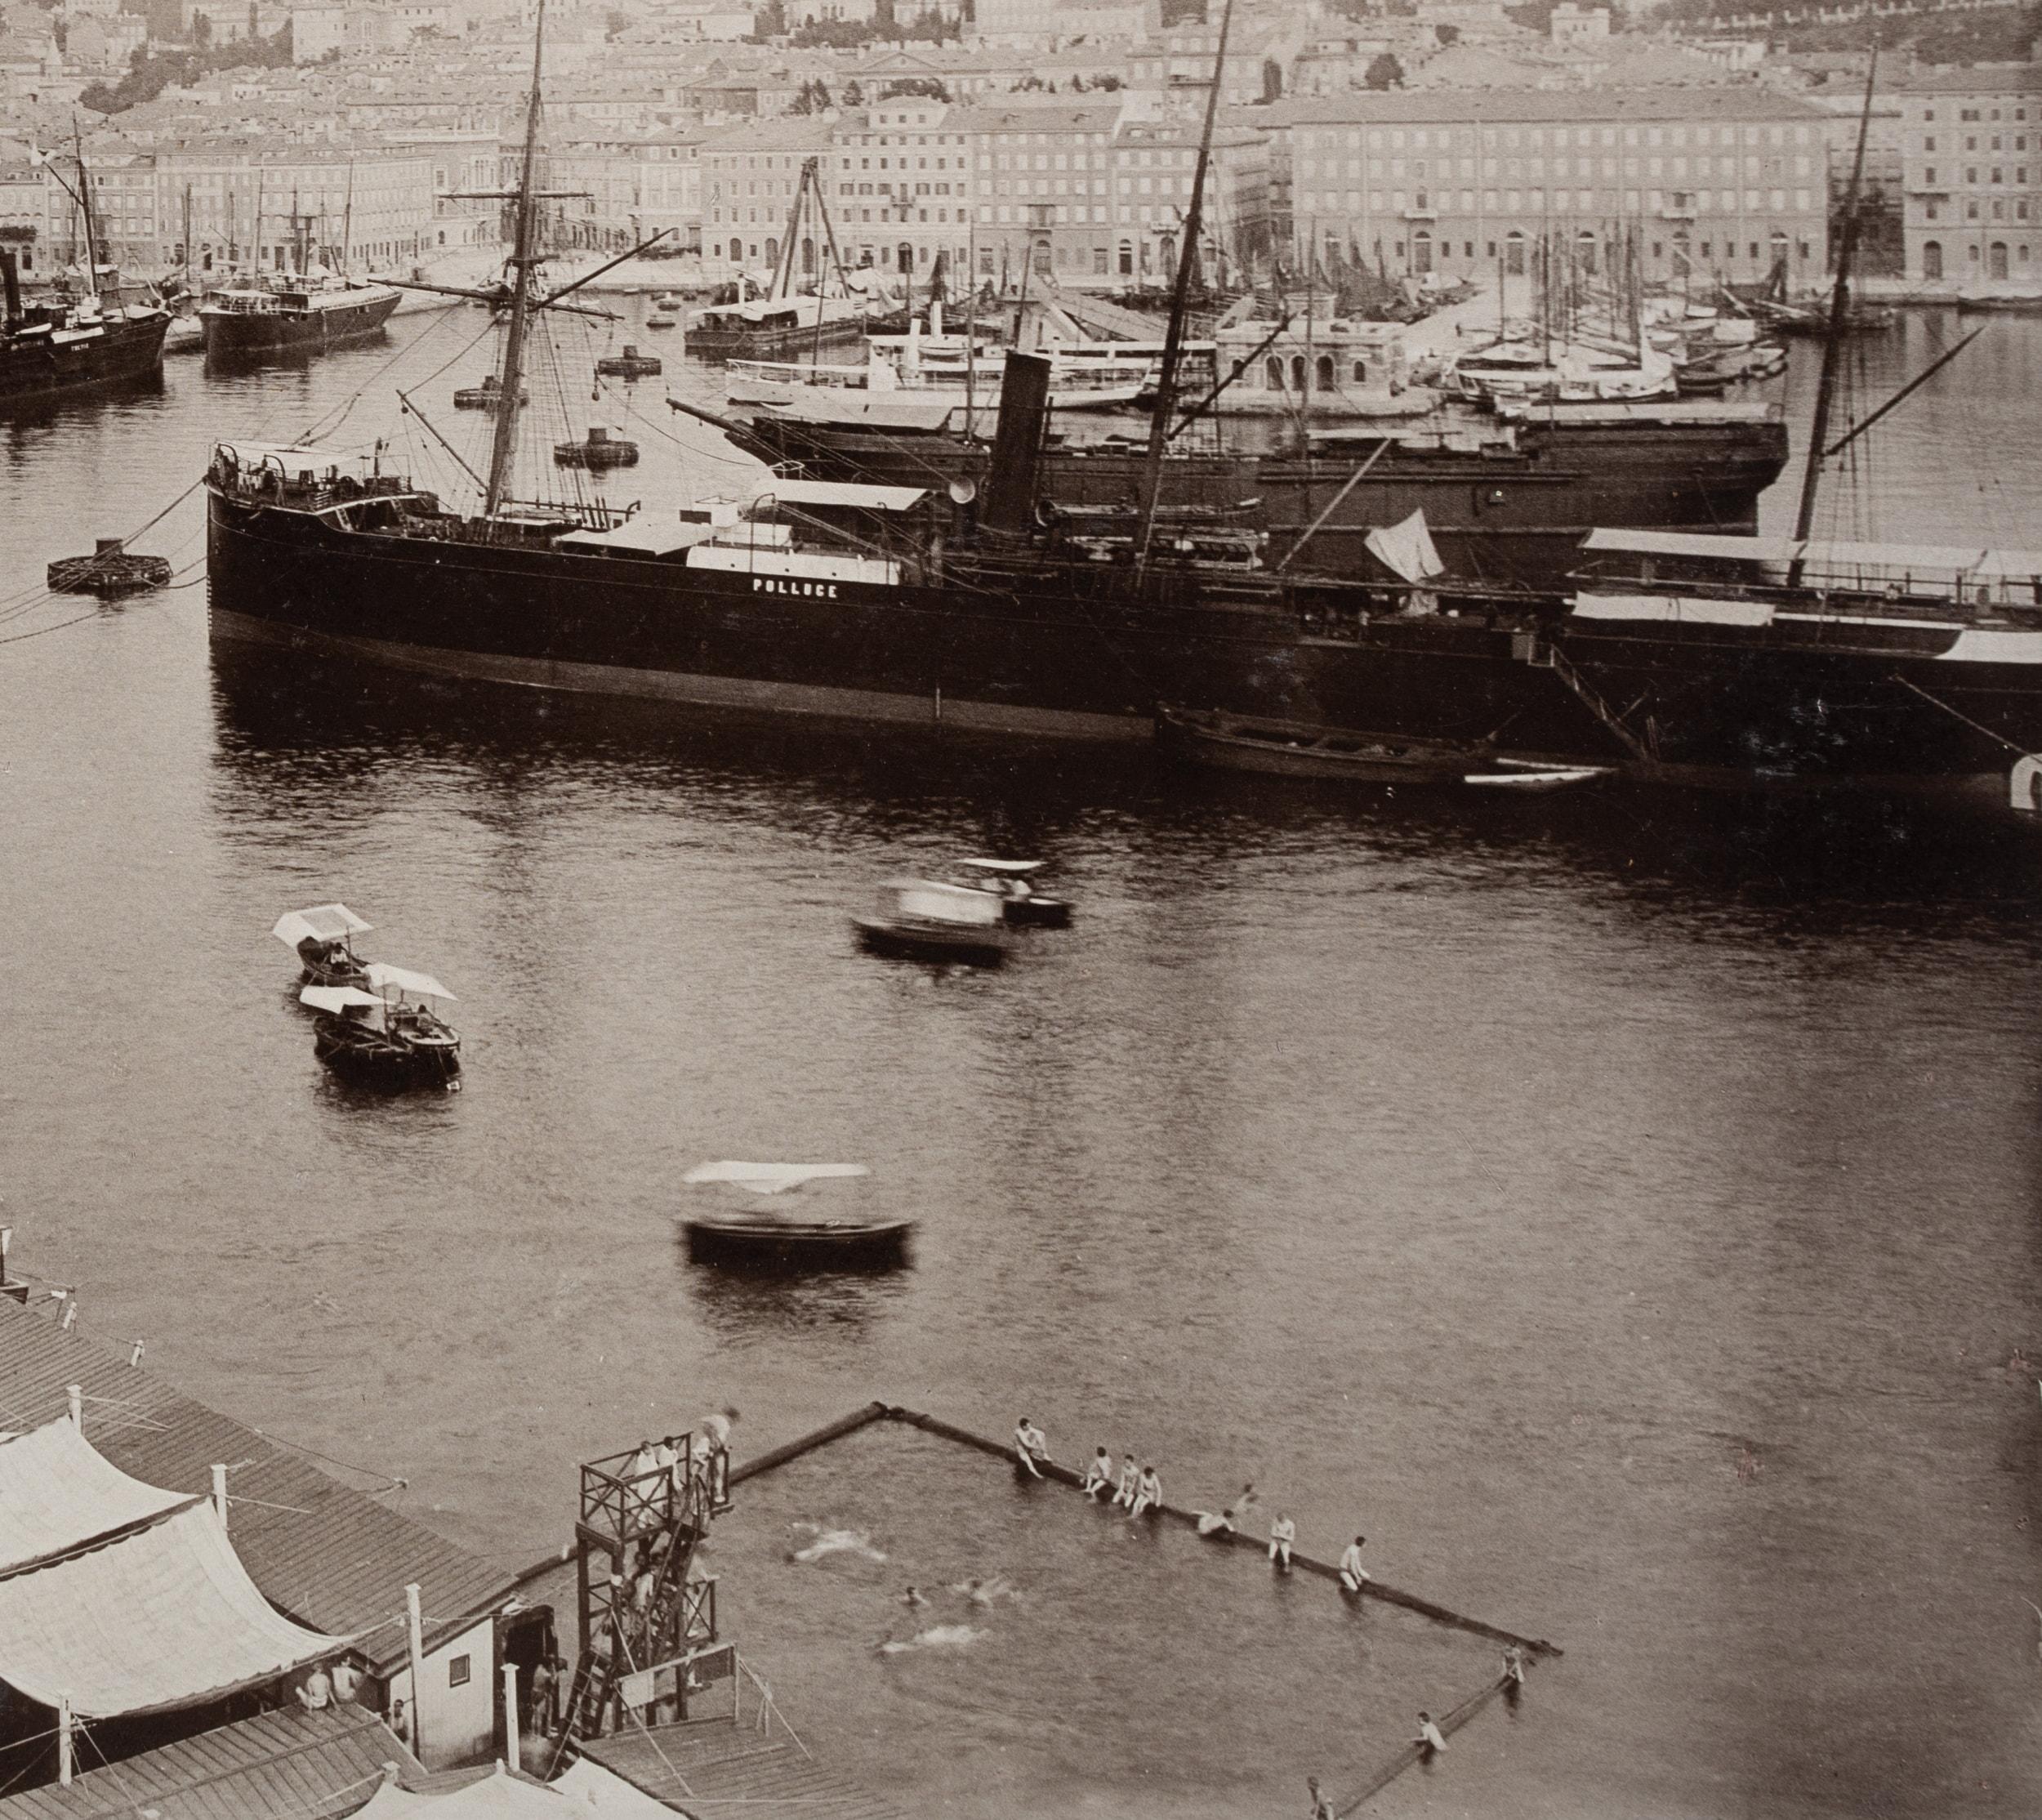 Stengel & Co. (19th century): Elevated view from the lighthouse over the port of Trieste with large ships and fenced-off outdoor pool with bathers, c. 1900, albumen paper print

Technique: albumen paper print, mounted on Cardboard

Stamp: Blank